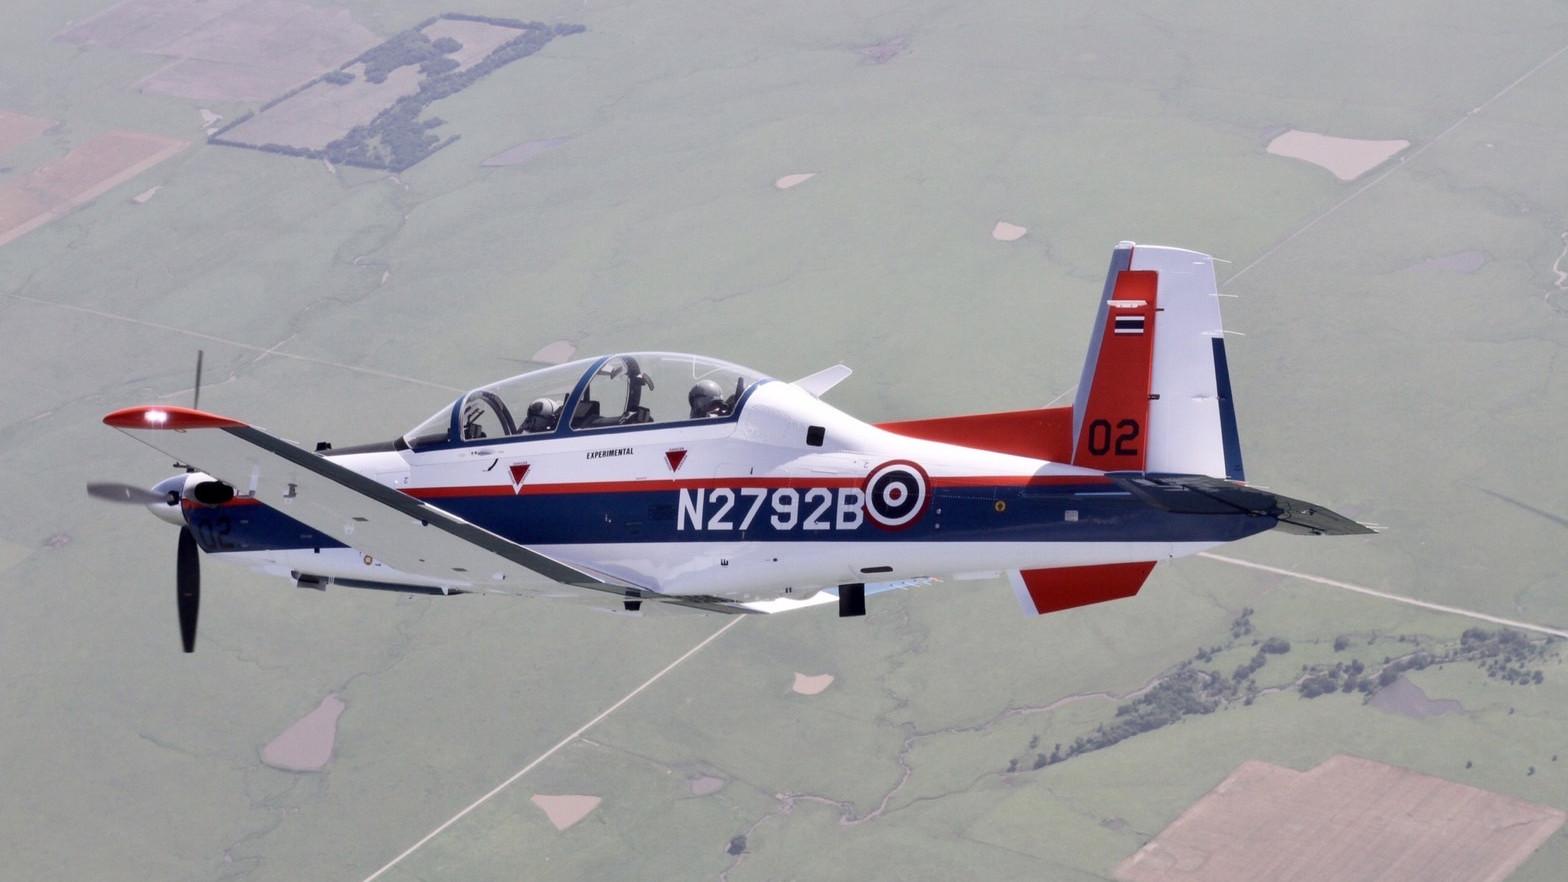 RTAF To Receive 12 T-6TH Trainers In The Next Few Months